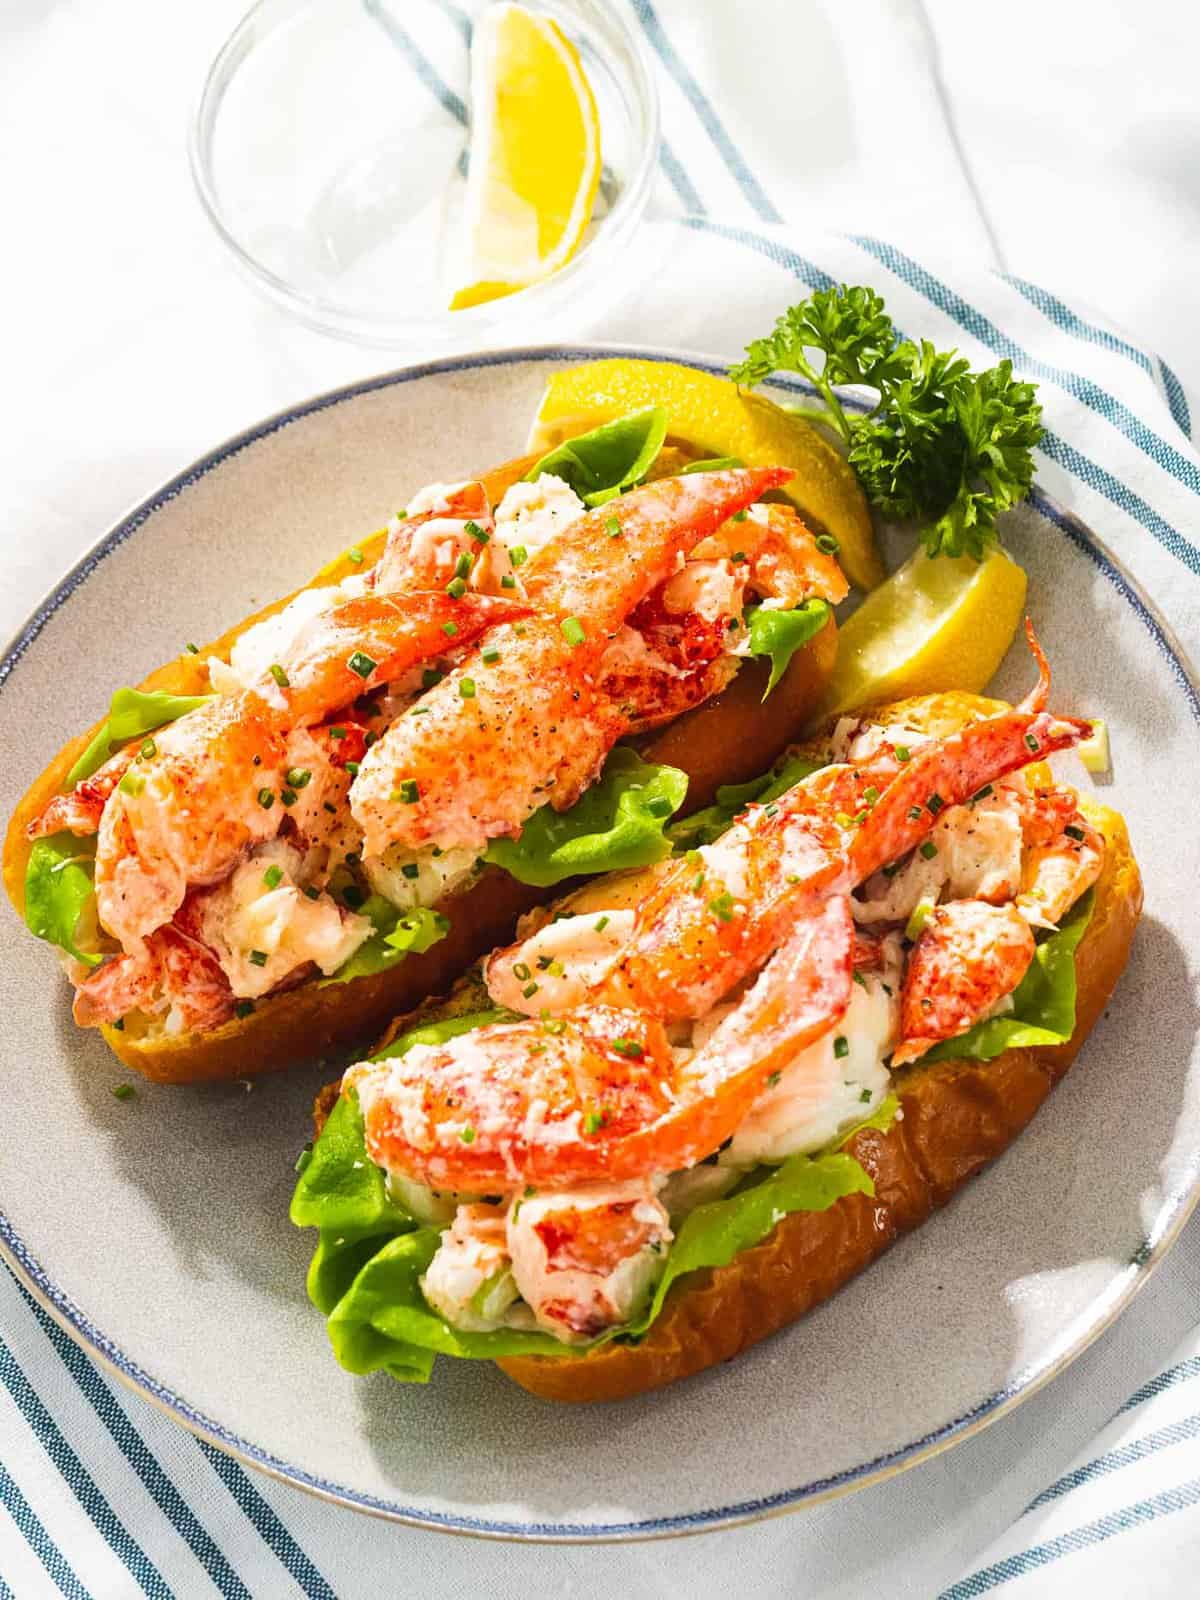 Maine lobster rolls coated in a light mayo dressing with butter lettuce.